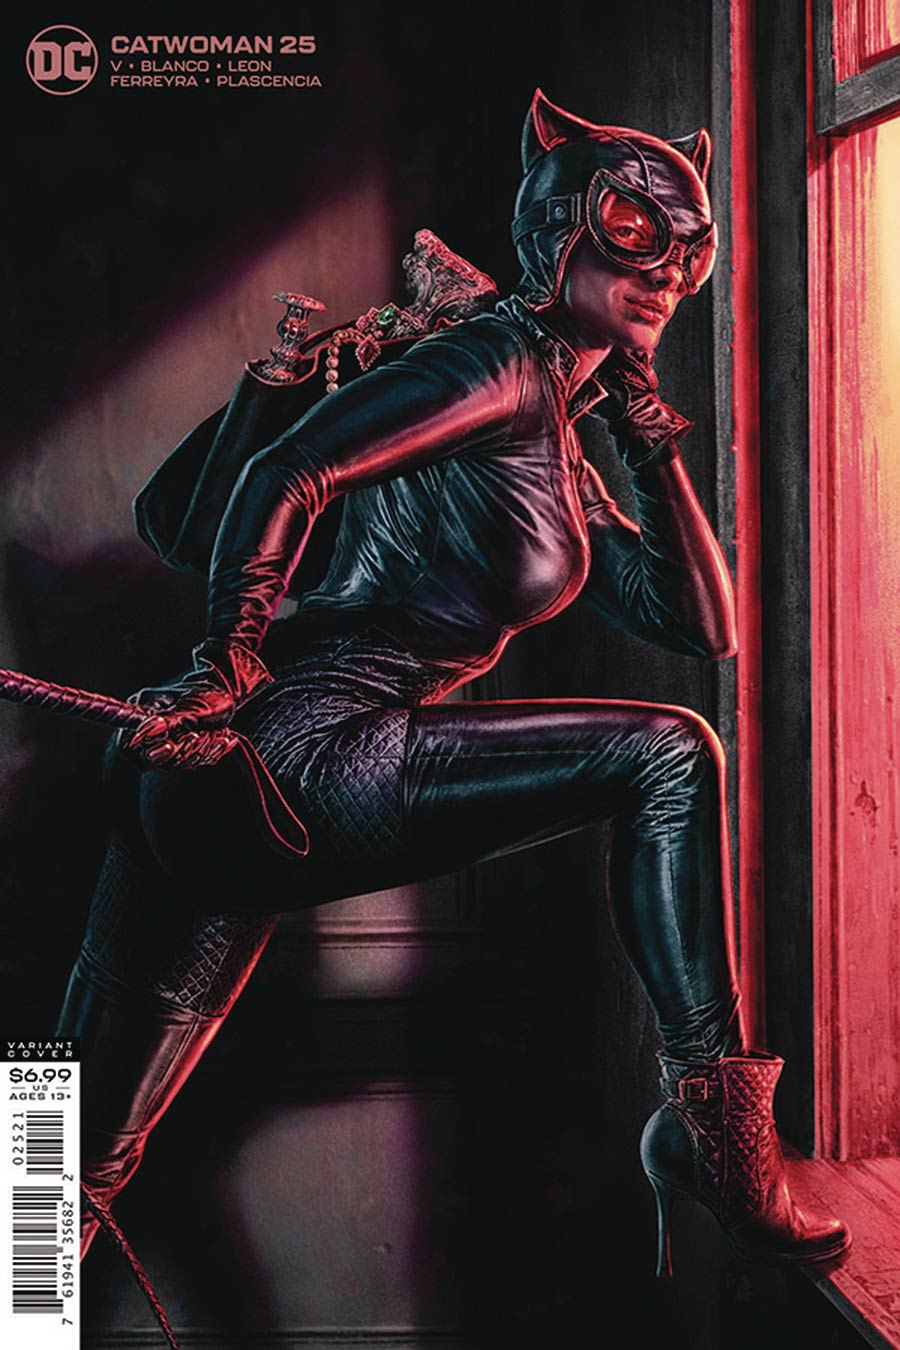 Catwoman Vol 5 #25 Cover C DF Lee Bermejo Card Stock Cover CGC Graded